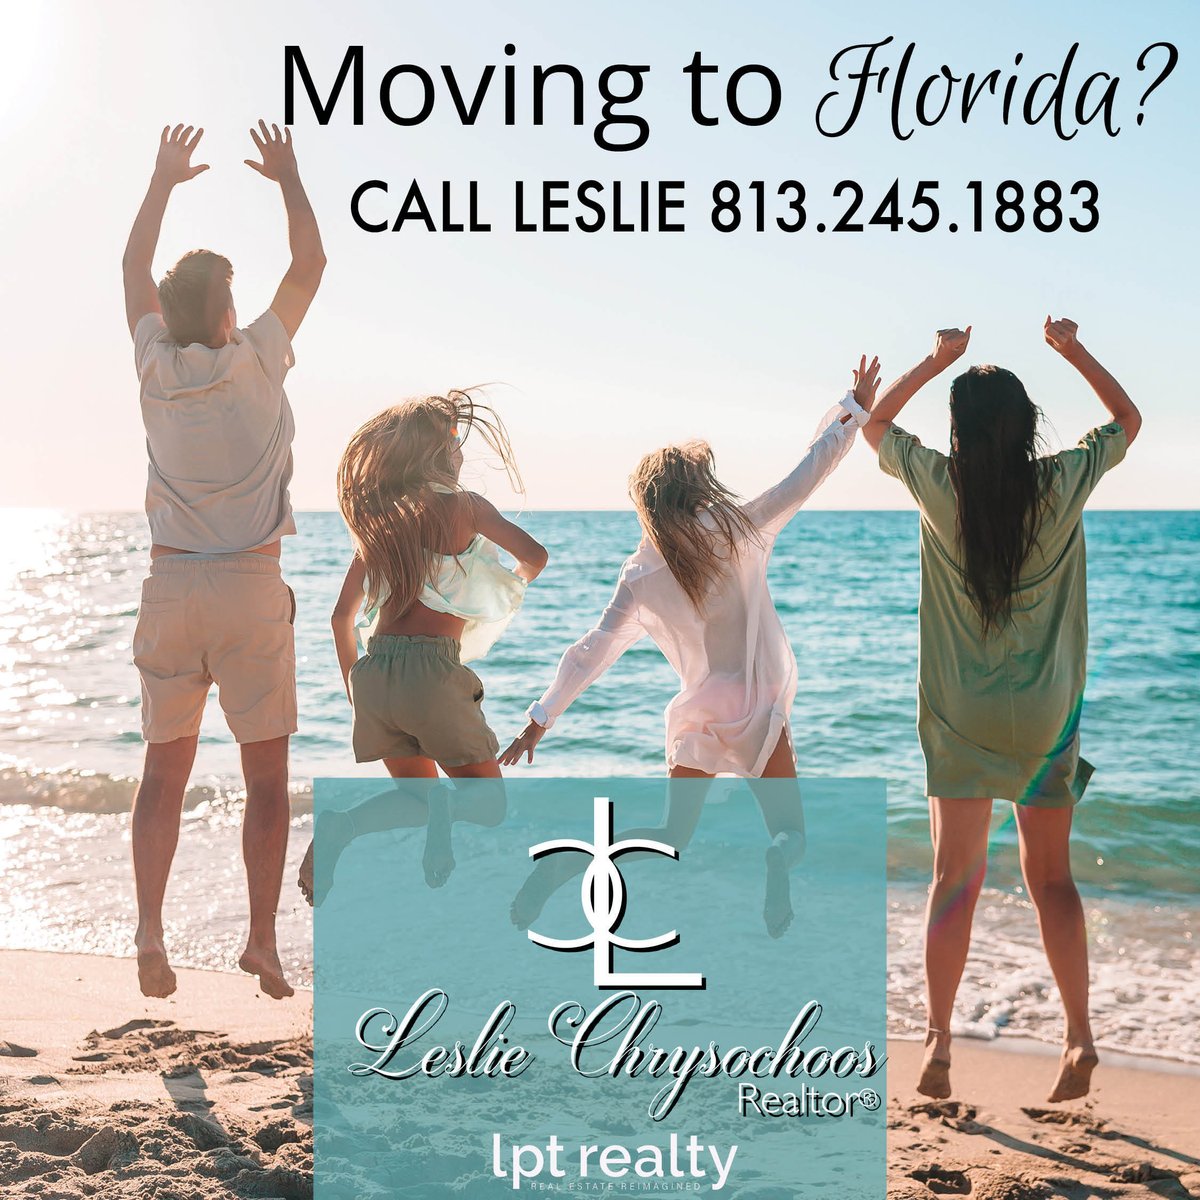 Moving to Florida?
Text or call 813-245-1883 today. I'm ready to get to work for you!

#realestate #luxuryhomes #tampabayhomes #lptrealty #LptMagic #RealEstateReimagined #lptsocials #tampahomefinders #tamparealtor #813realtor #tampabay #realestateagent #relocatetoFlorida...